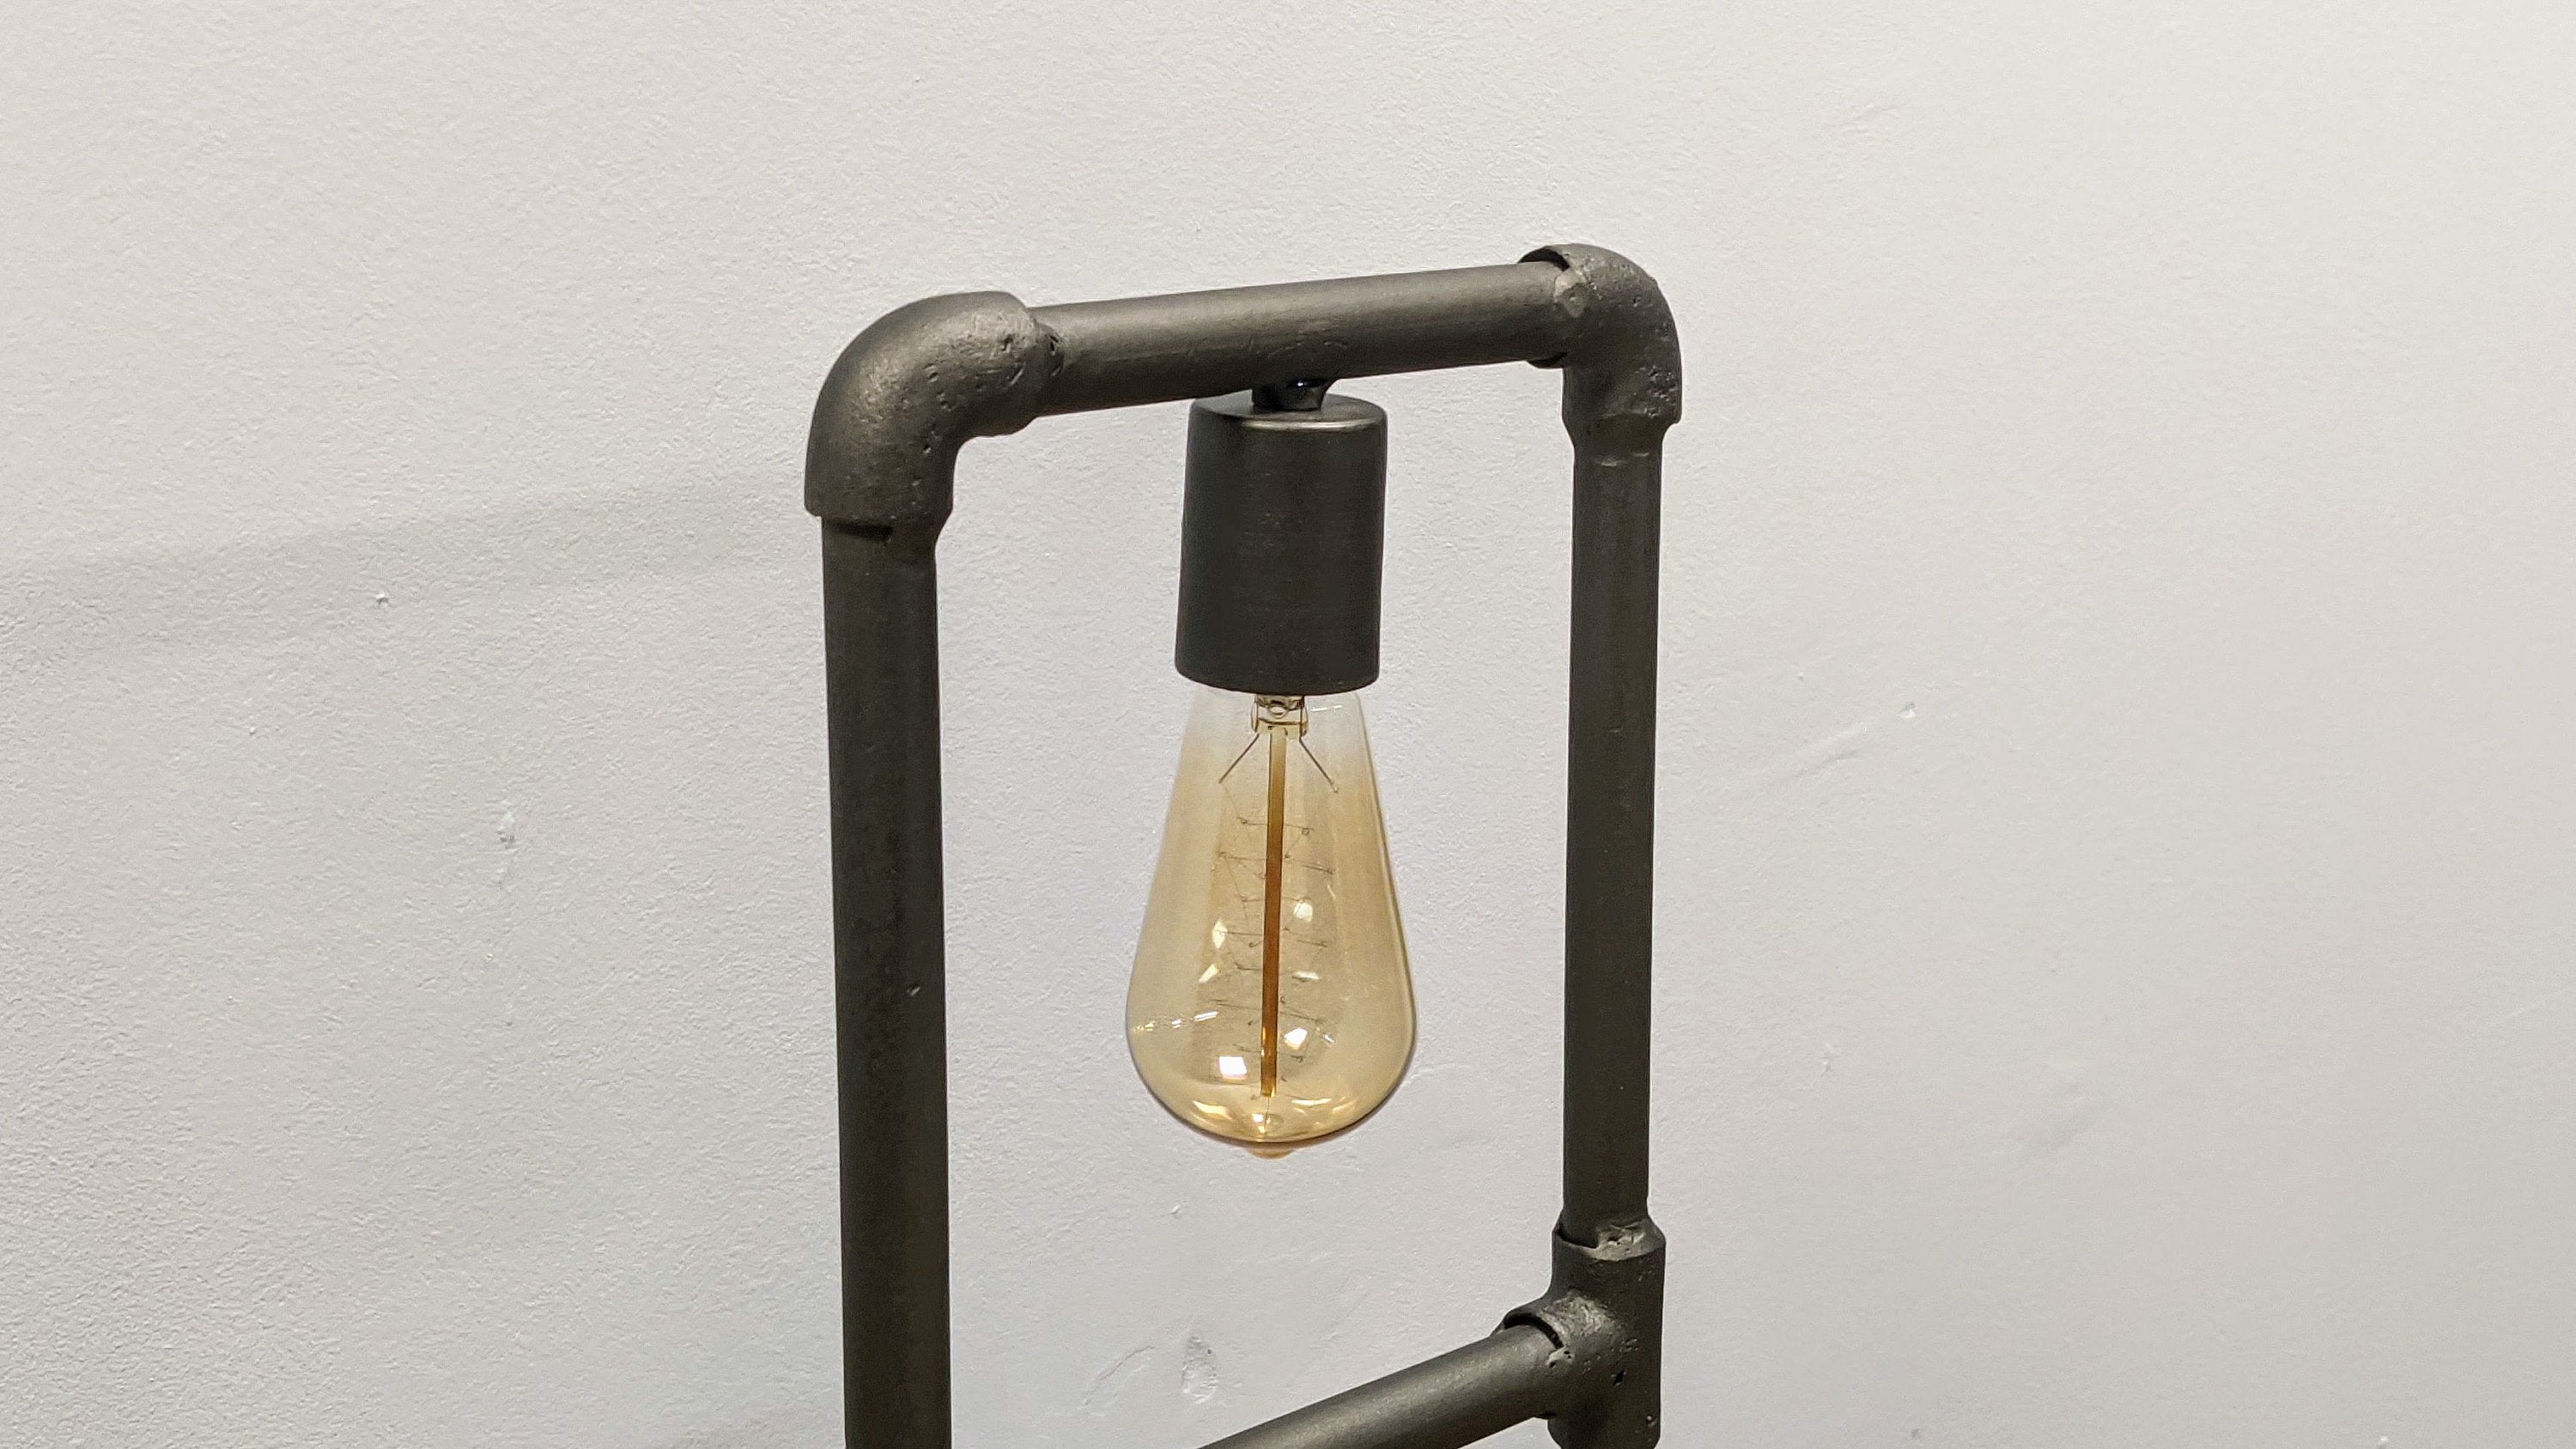 Side Table Lamp with industrial flair, perfect as a stylish table light.